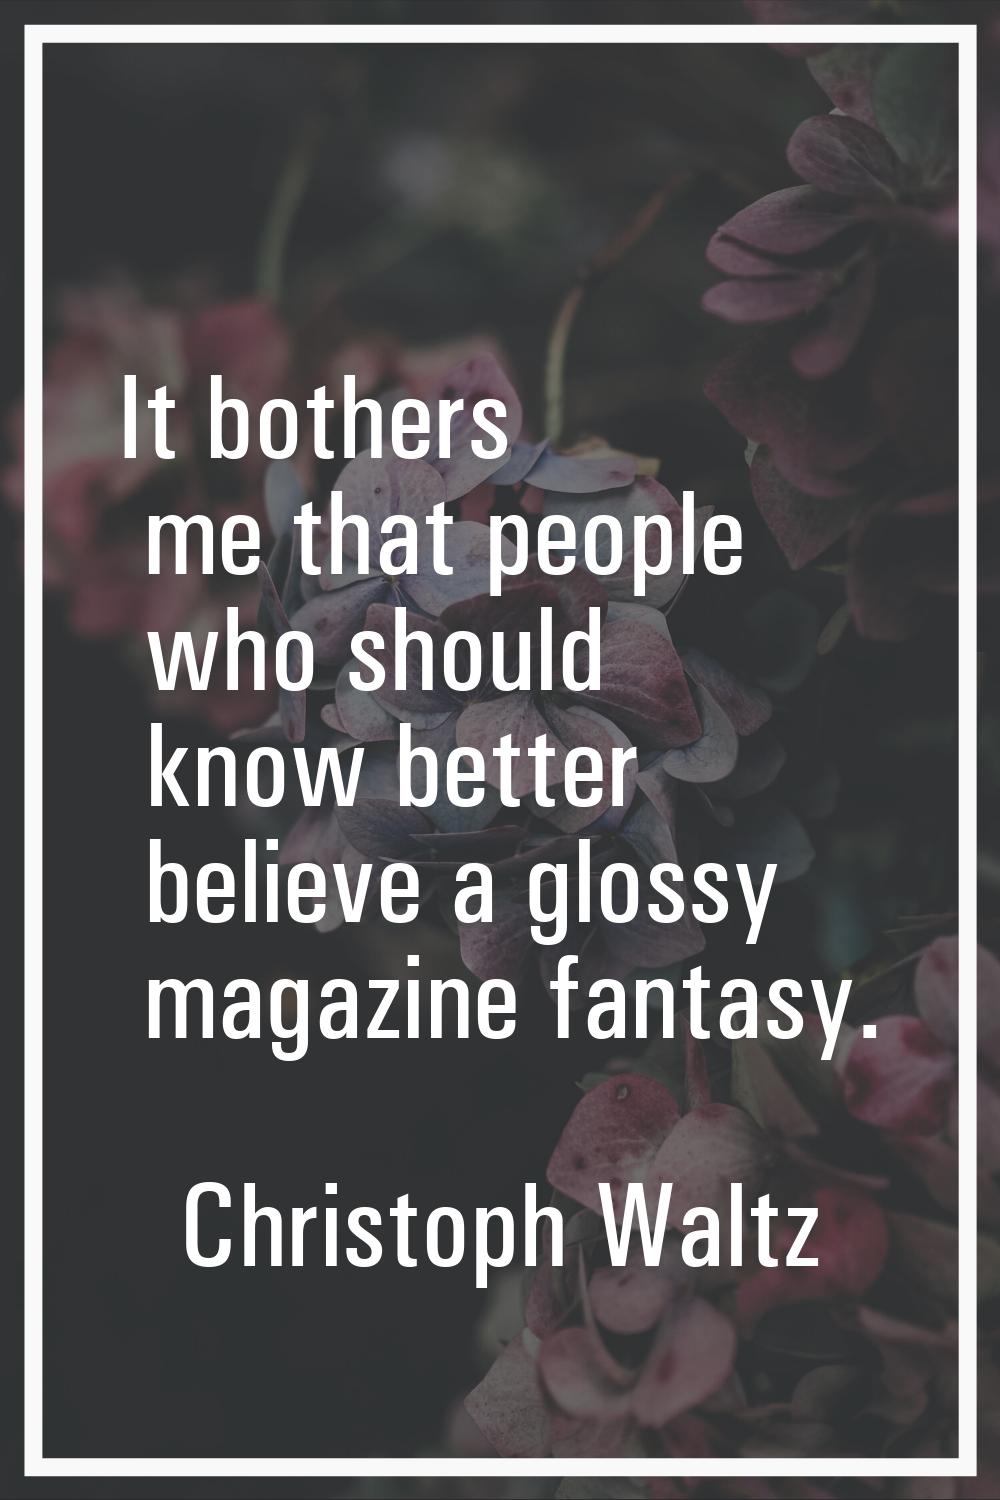 It bothers me that people who should know better believe a glossy magazine fantasy.